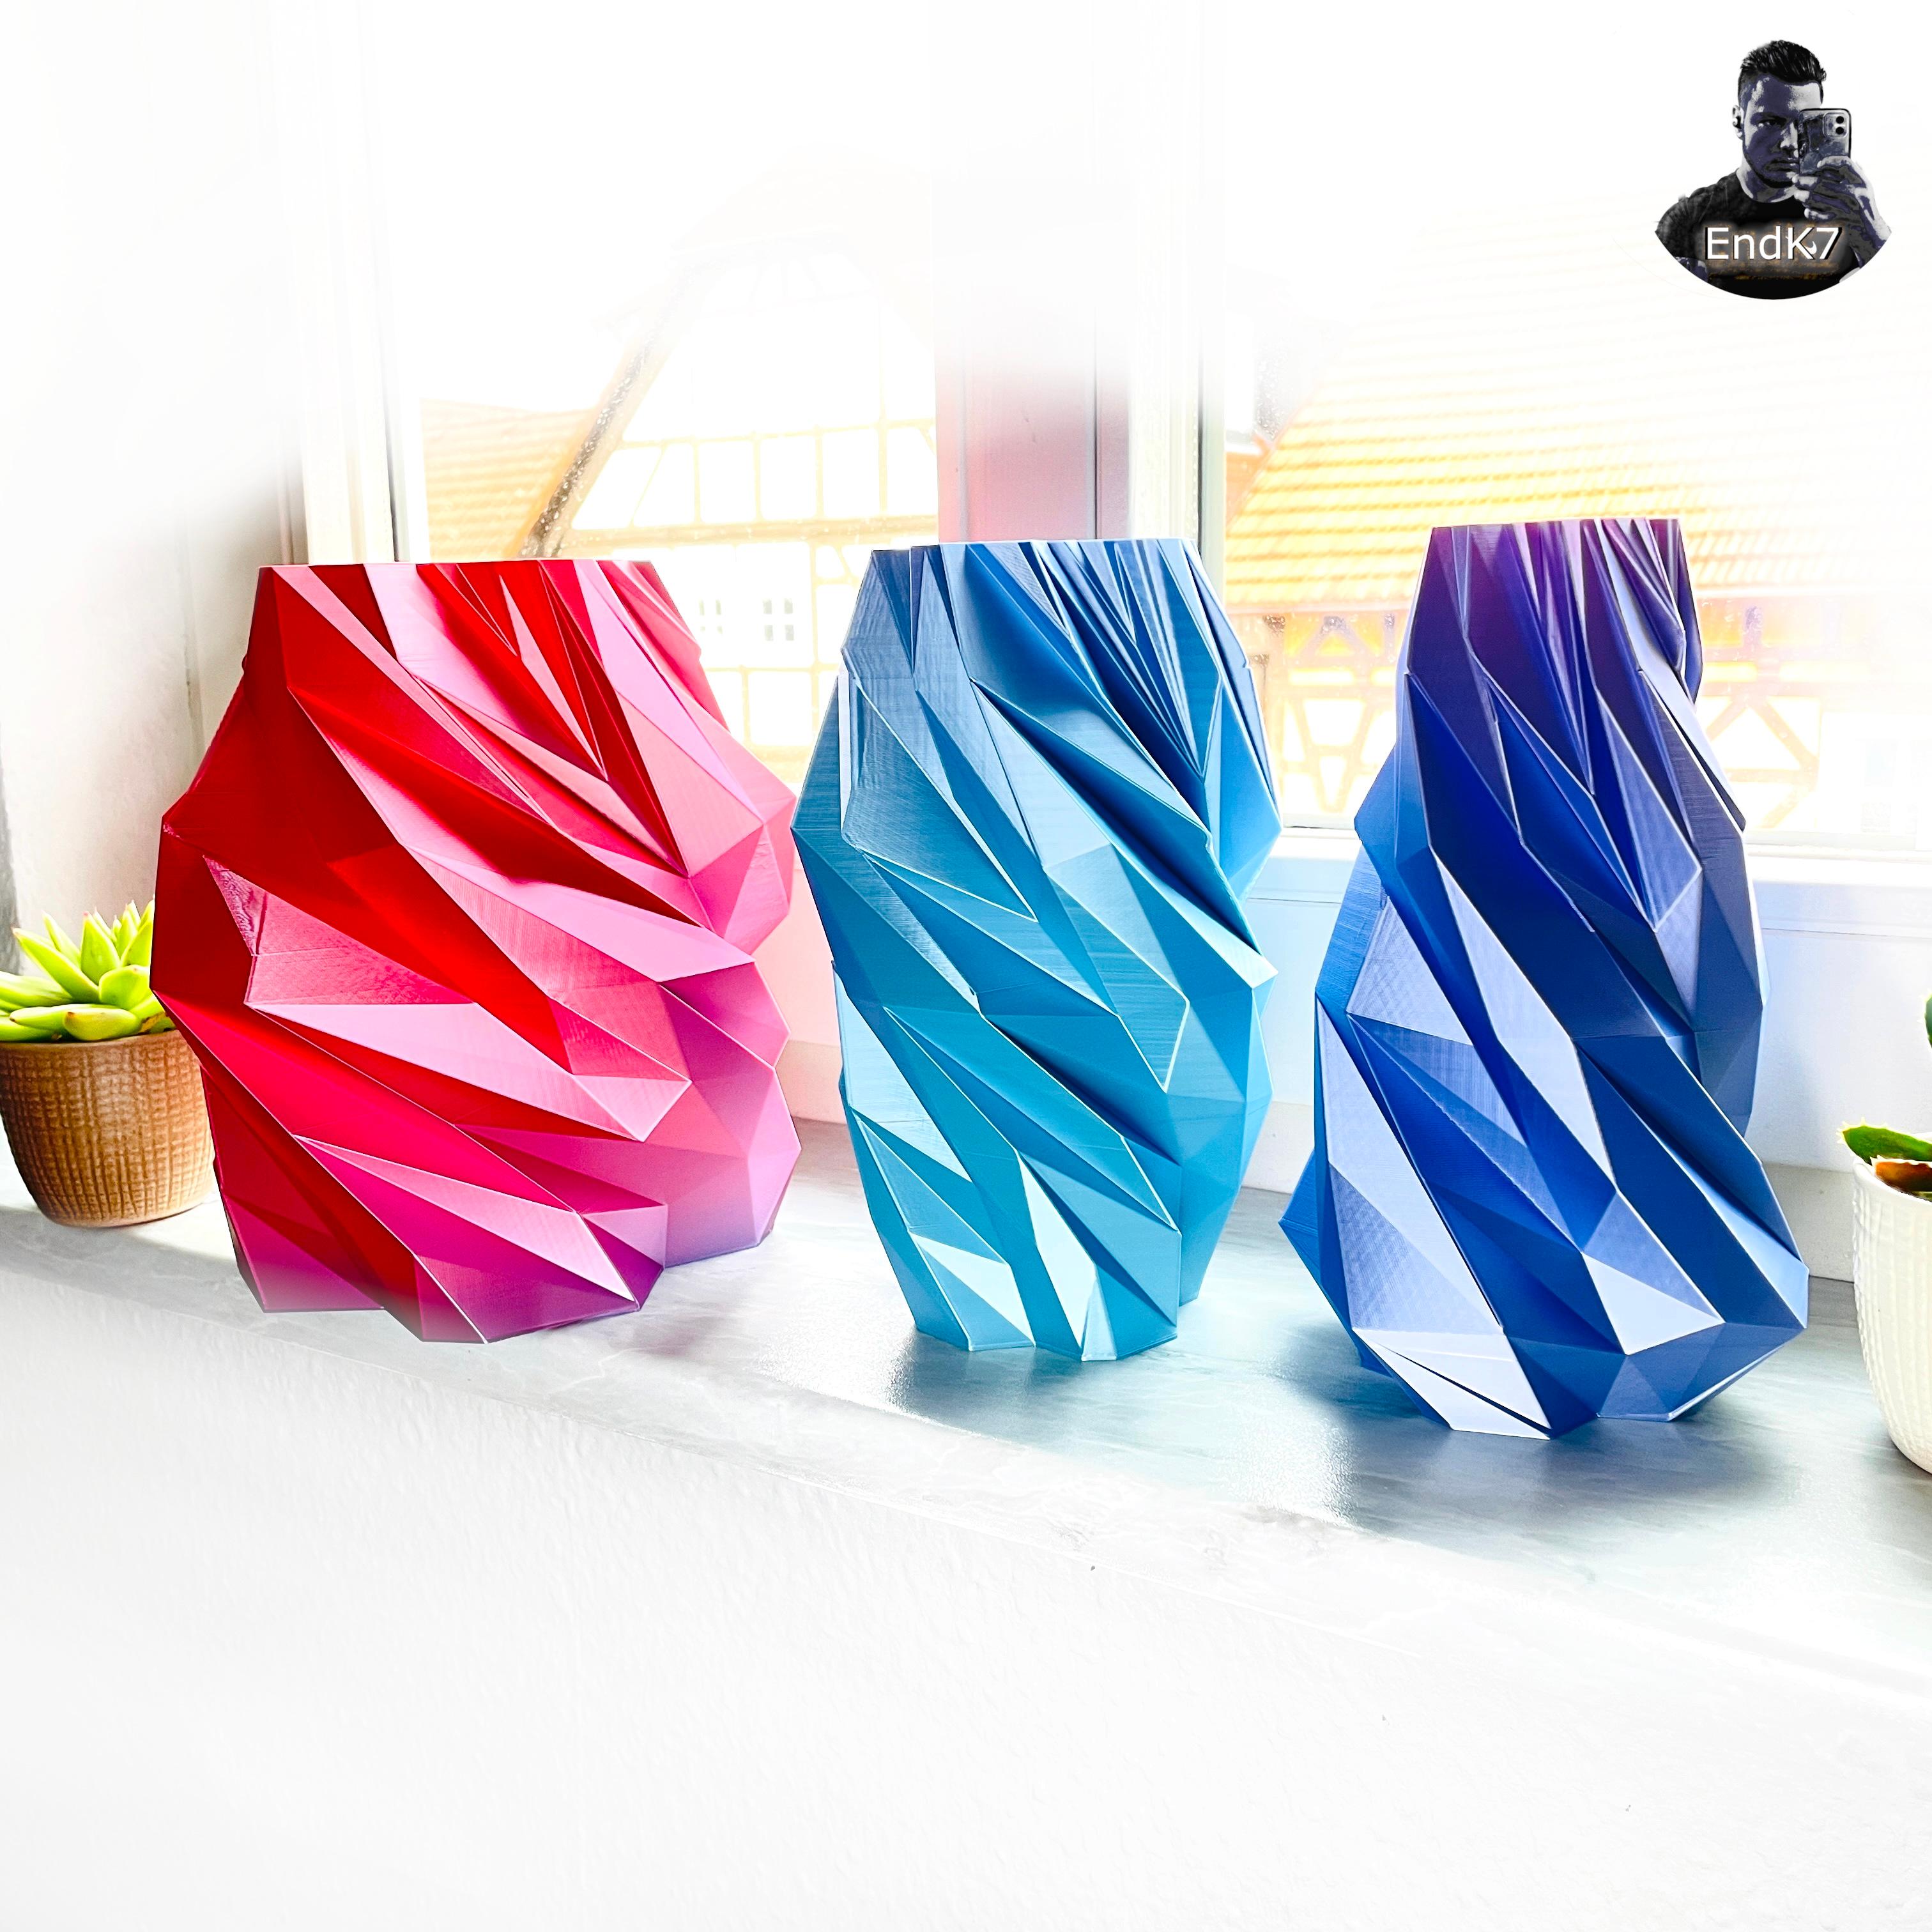 Special Low Poly Vases - 3 Designs 3d model